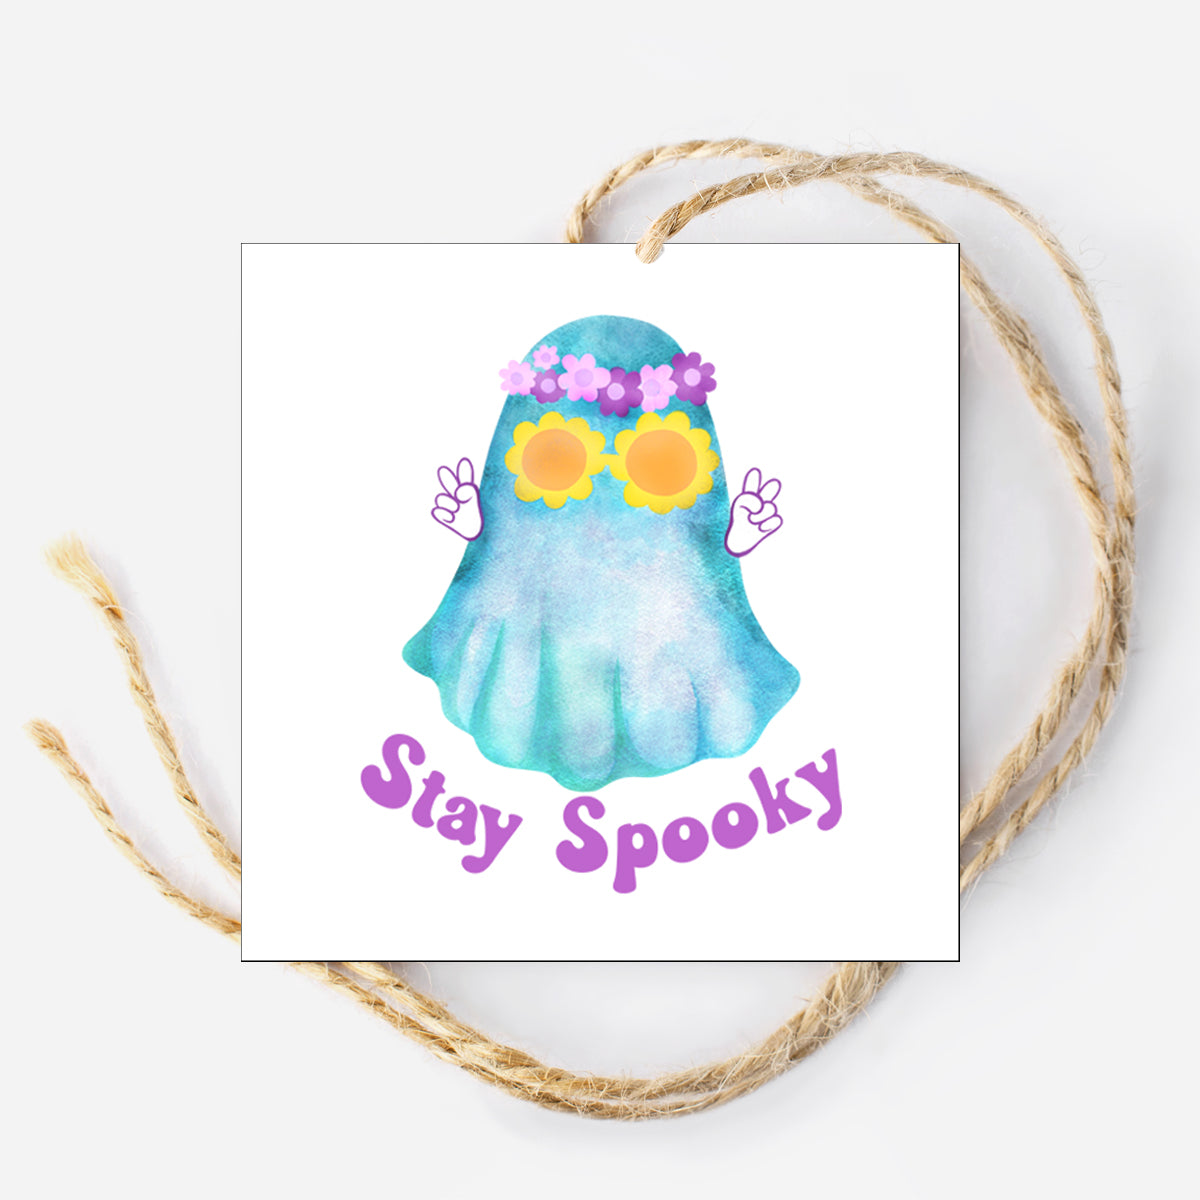 Stay Spooky Instant Download Tag